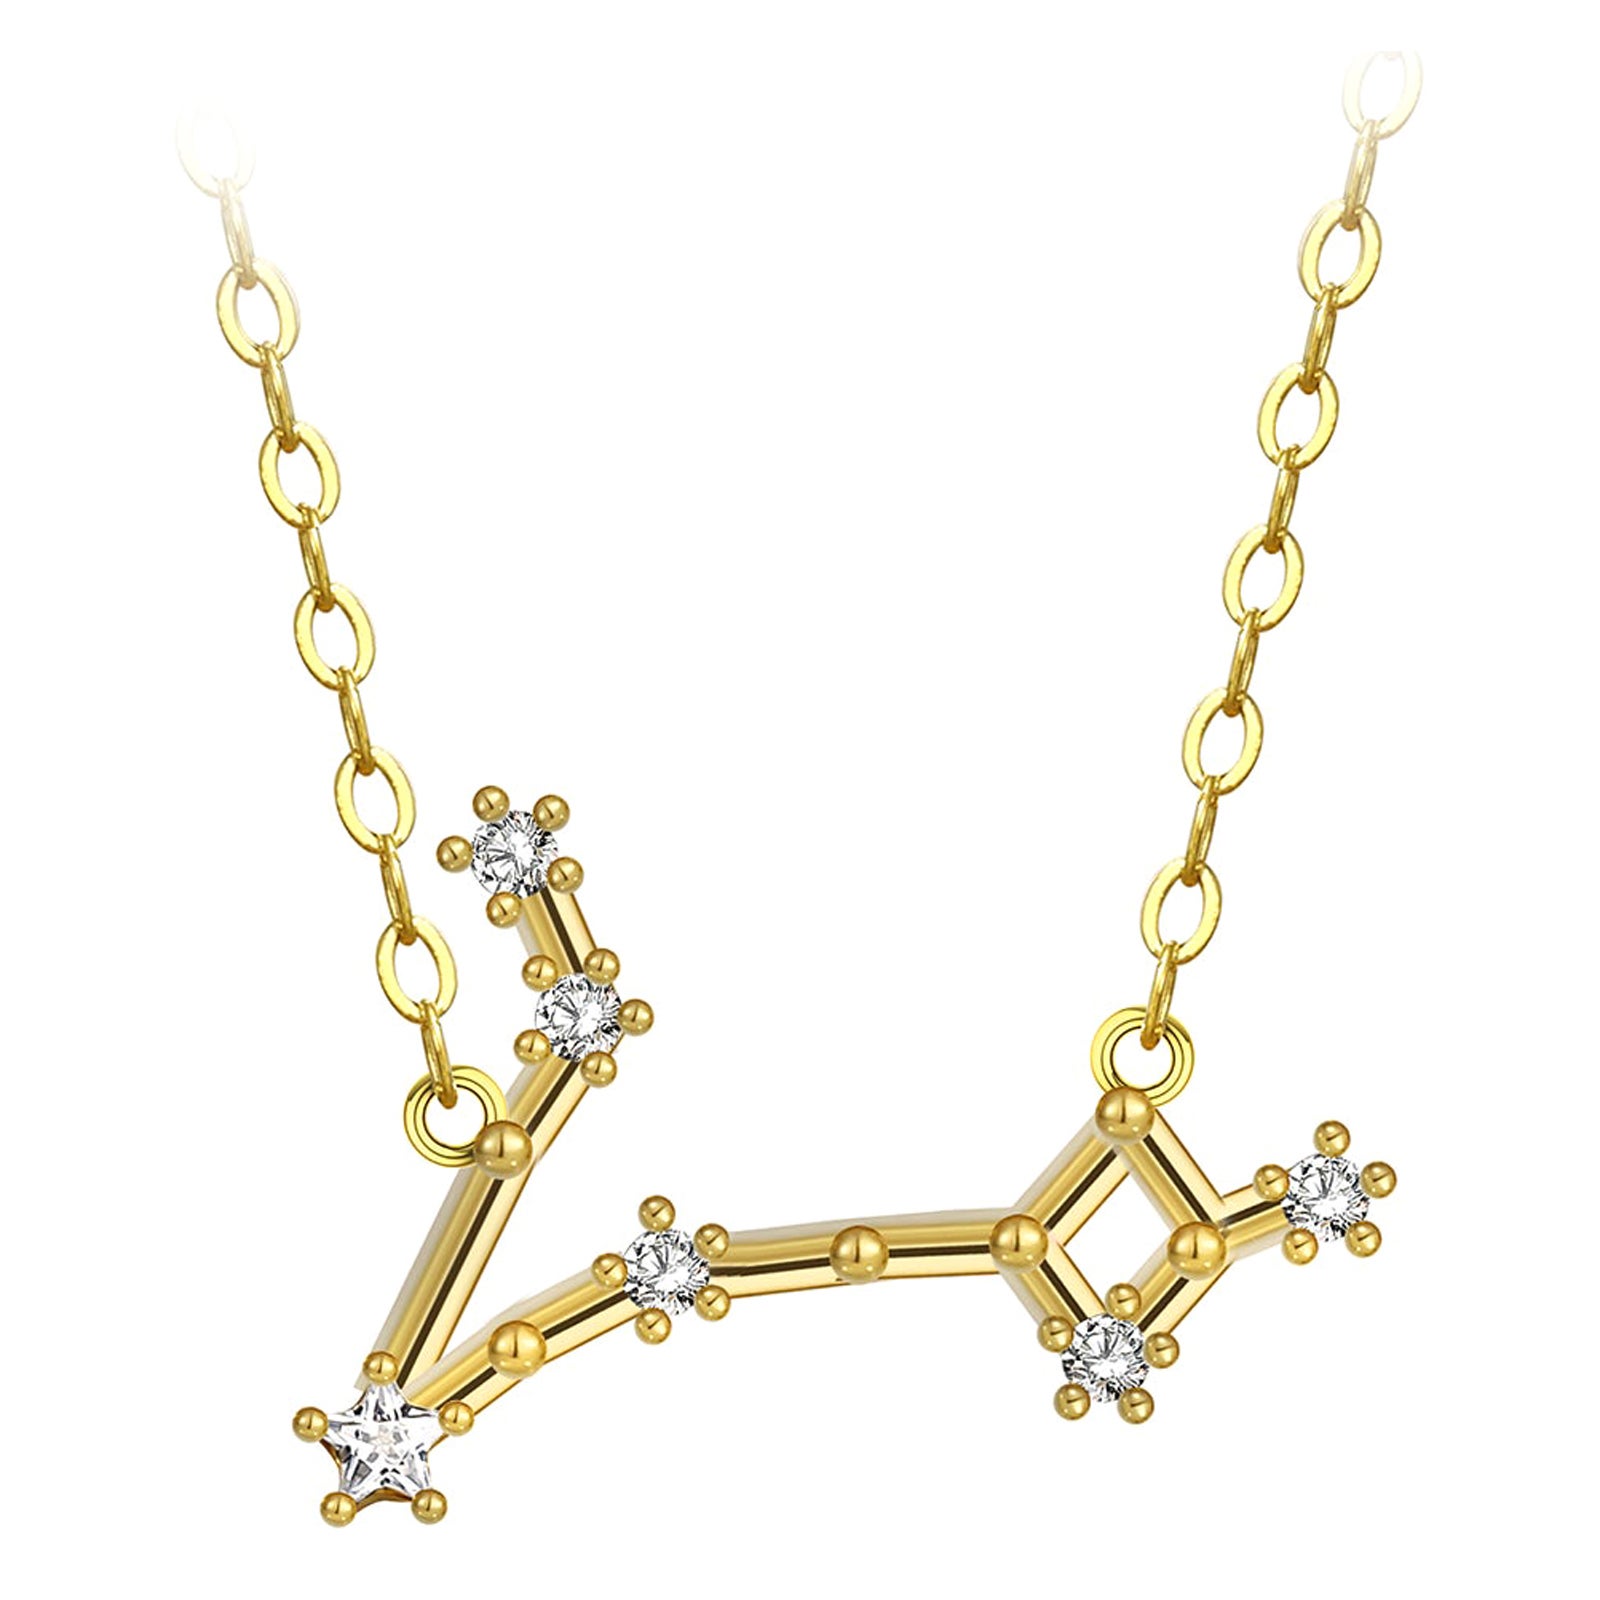 Pisces Star Constellation Necklace For Sale